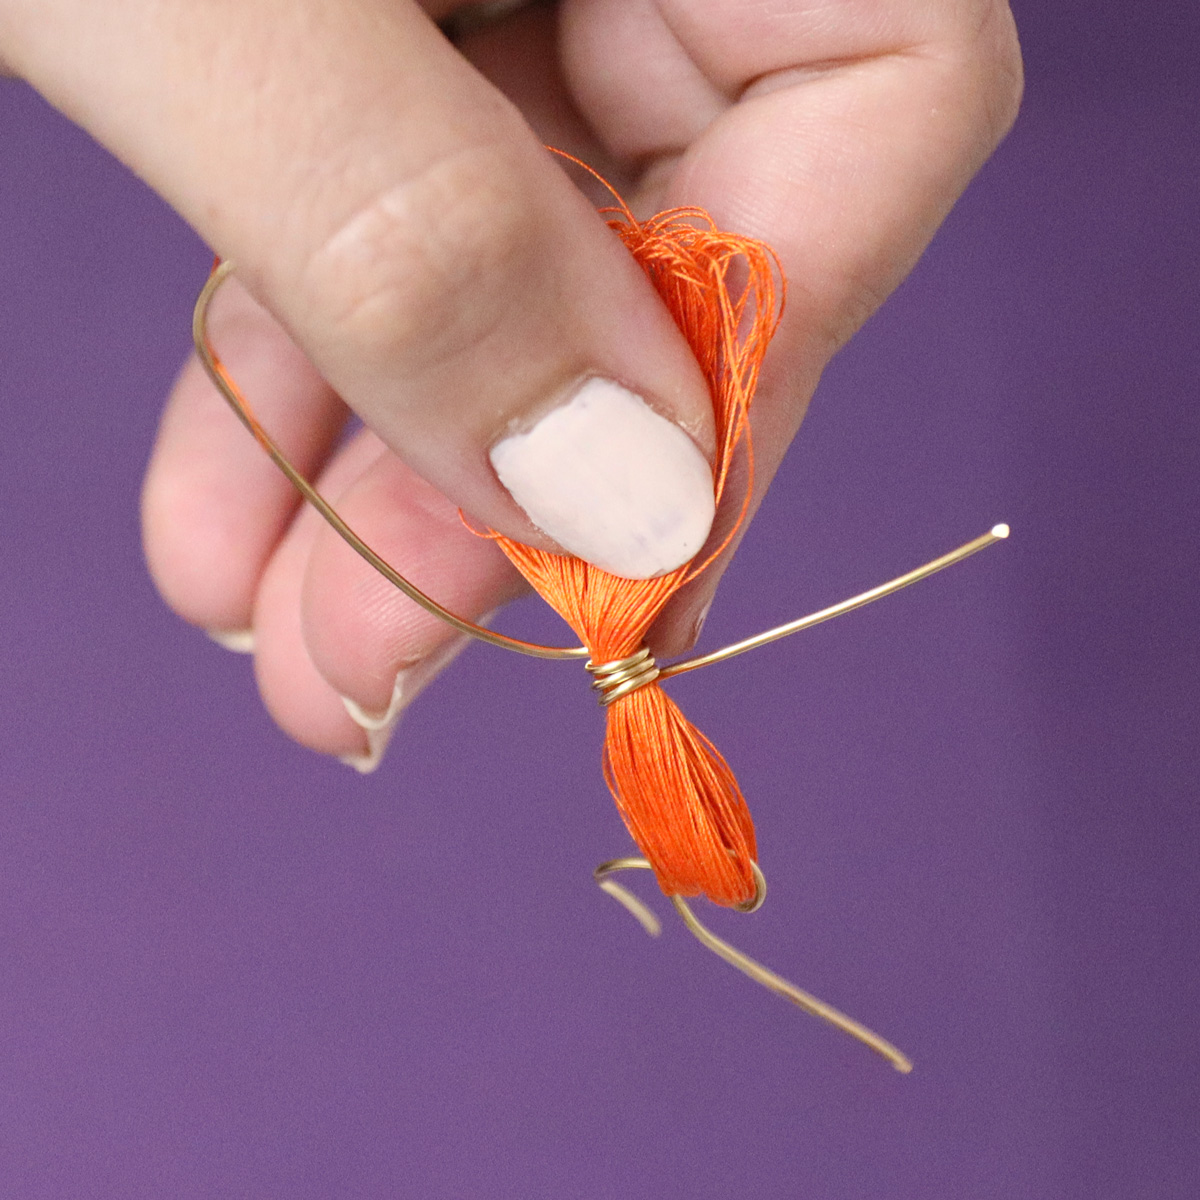 Small Thread Tassels for Earrings & More! * Moms and Crafters